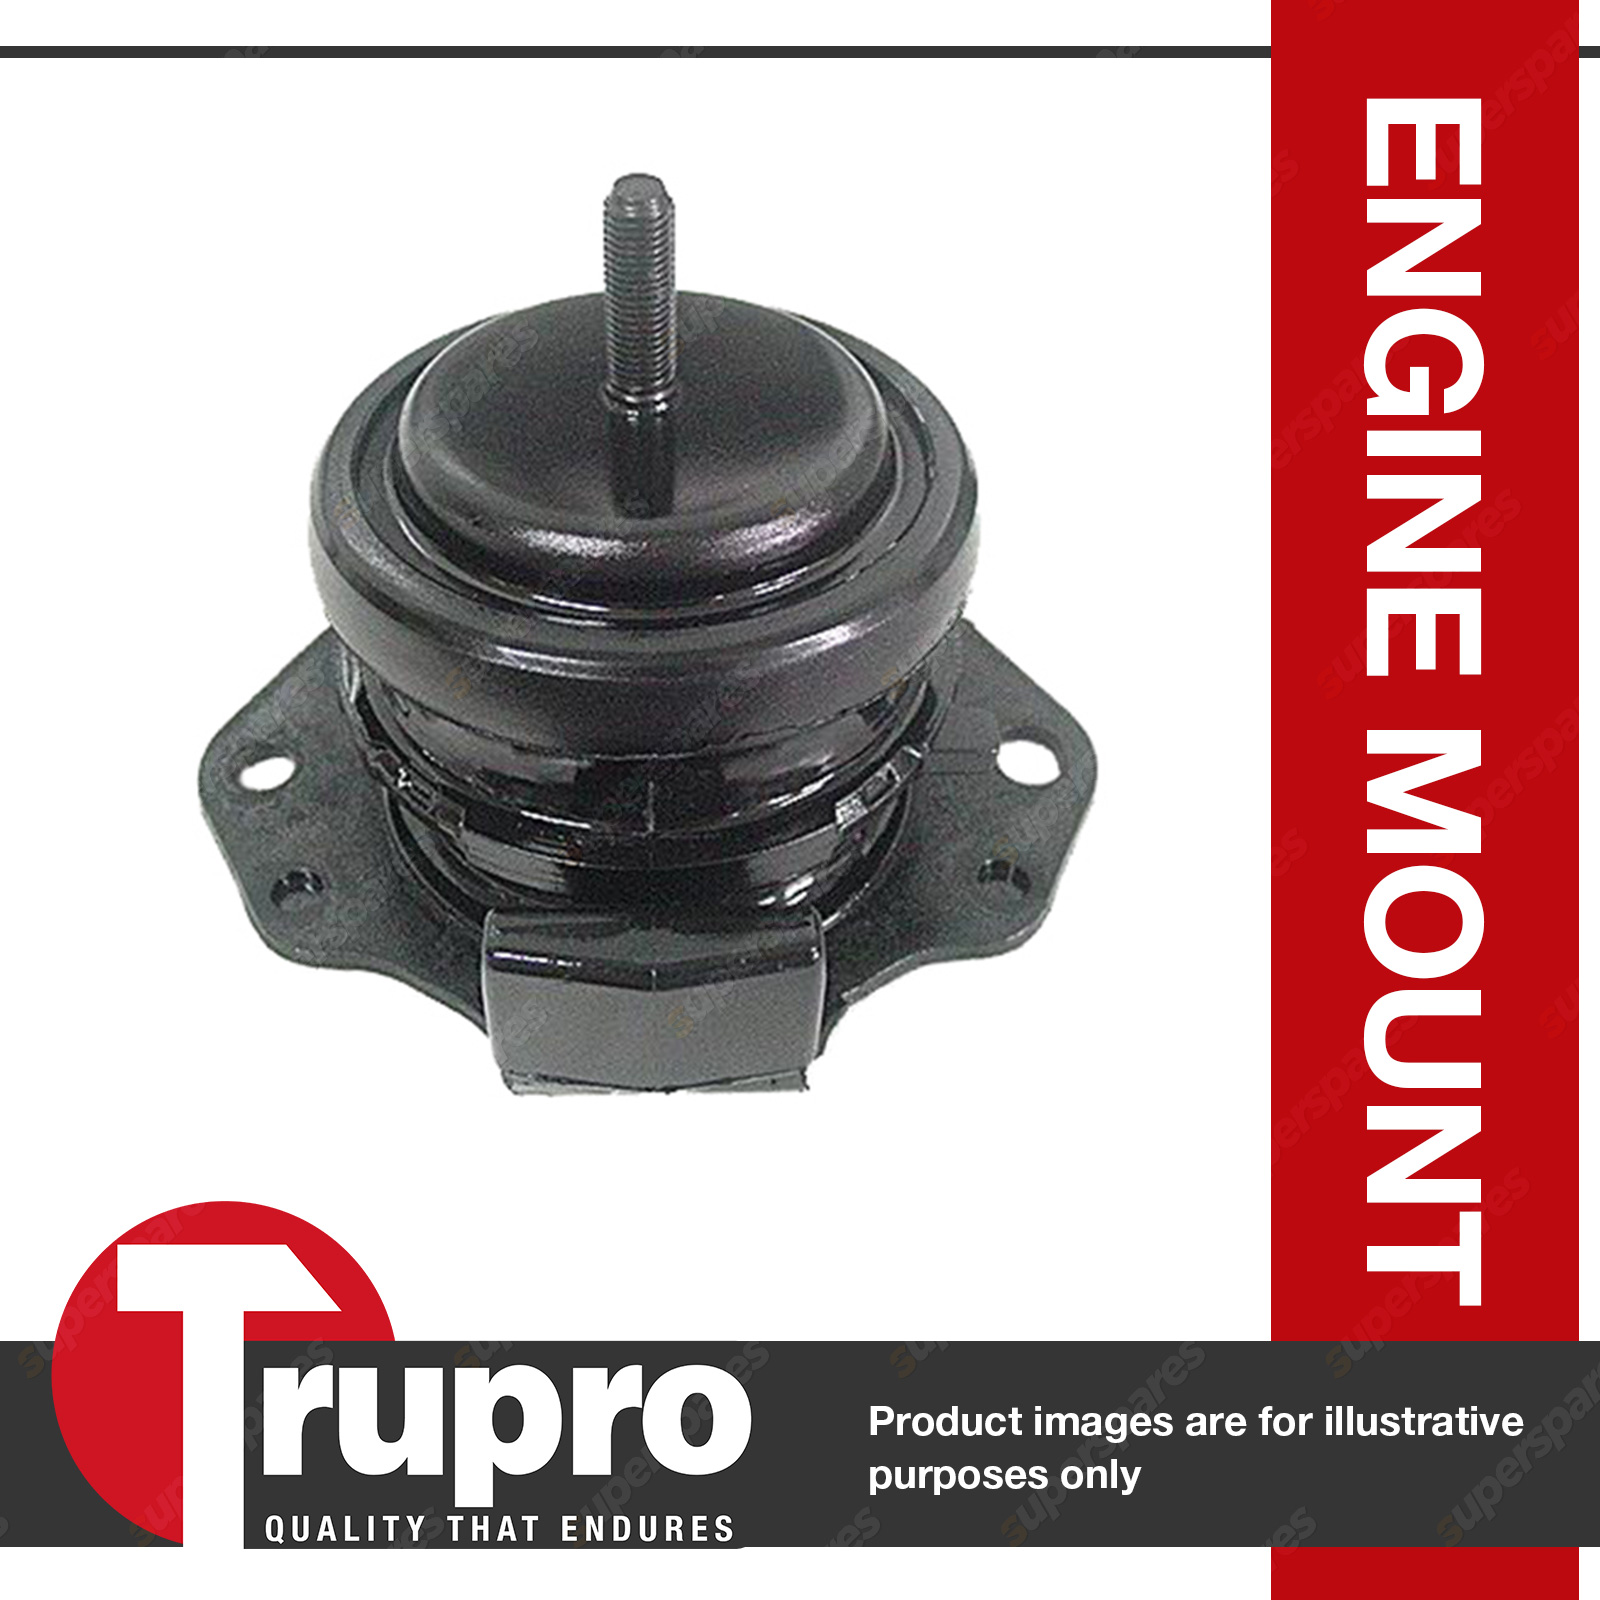 For MITSUBISHI PAJERO FRONT ENGINE GEARBOX SUPPORT MOUNT MANUAL MT